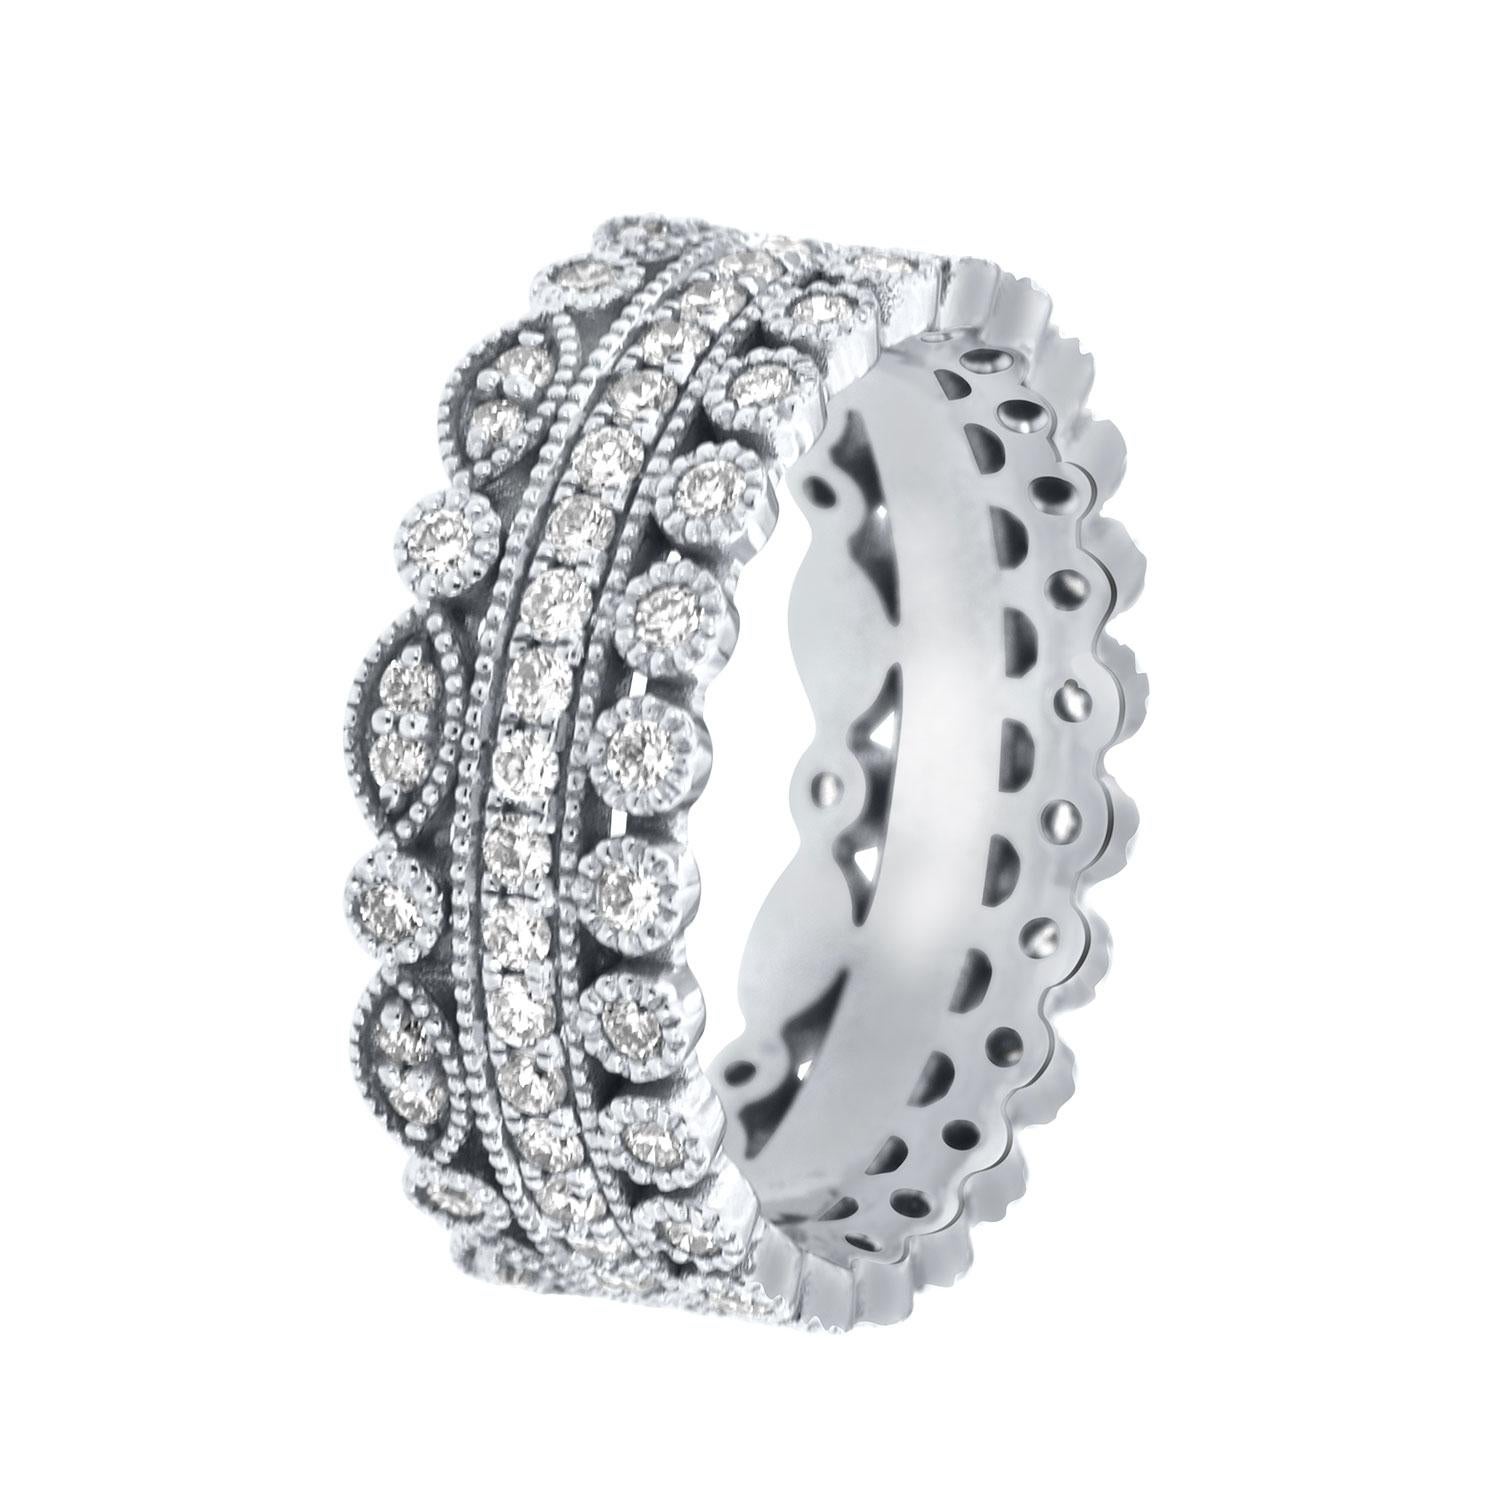 This Antique style stack band features a set of three rings. This vintage ring can be worn individually or as a stack. The diamond weight is 1.00 Carat.

The ring size is 7.5. It's resizable up to 1/2 size up 